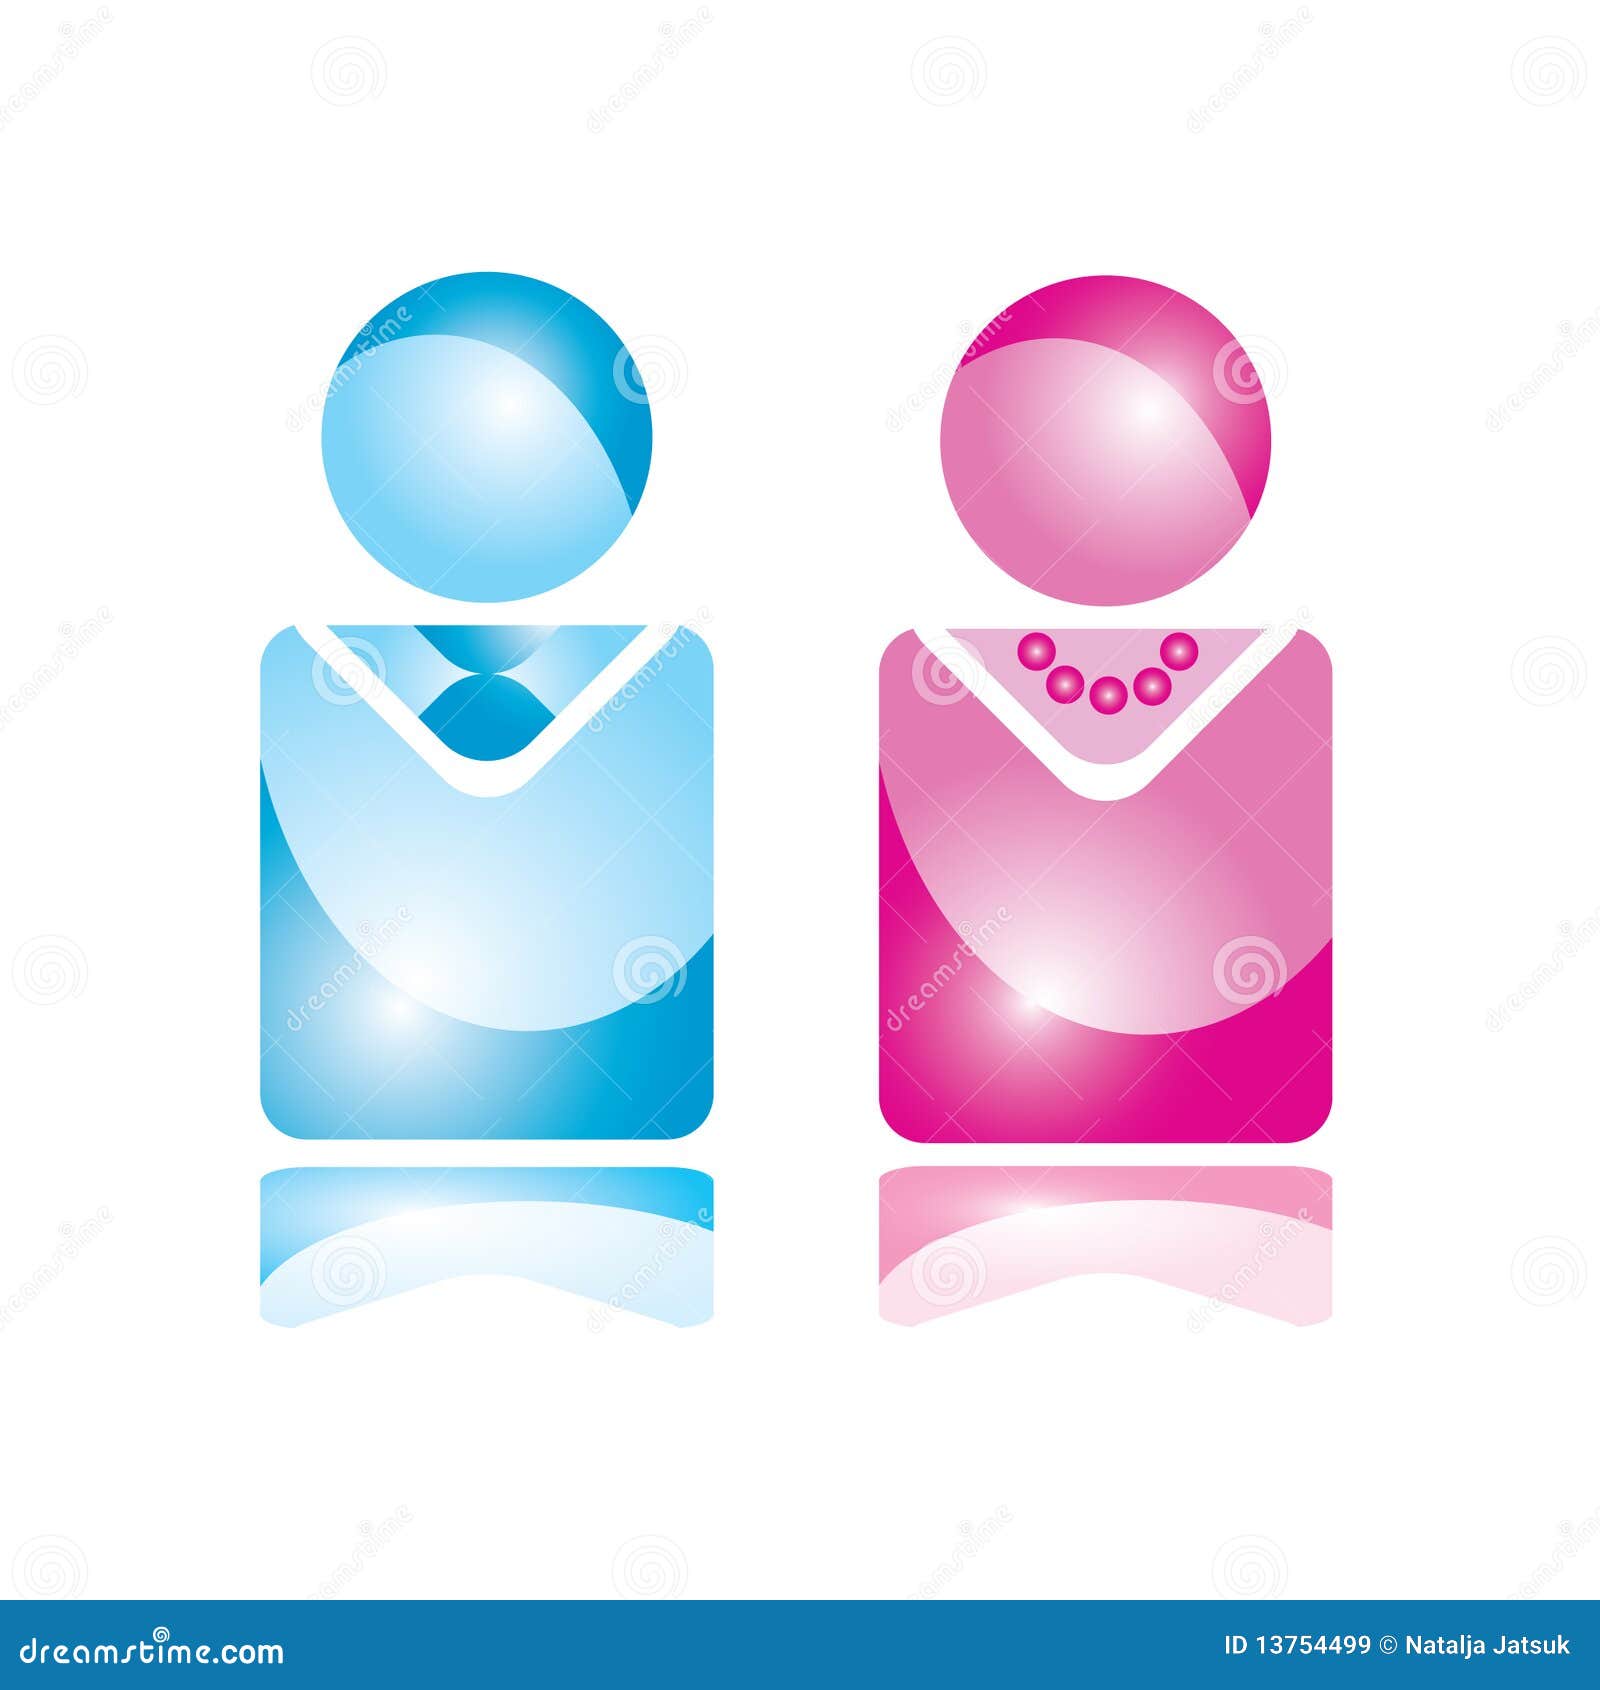 Download Vector Man & Woman stock vector. Illustration of couple - 13754499